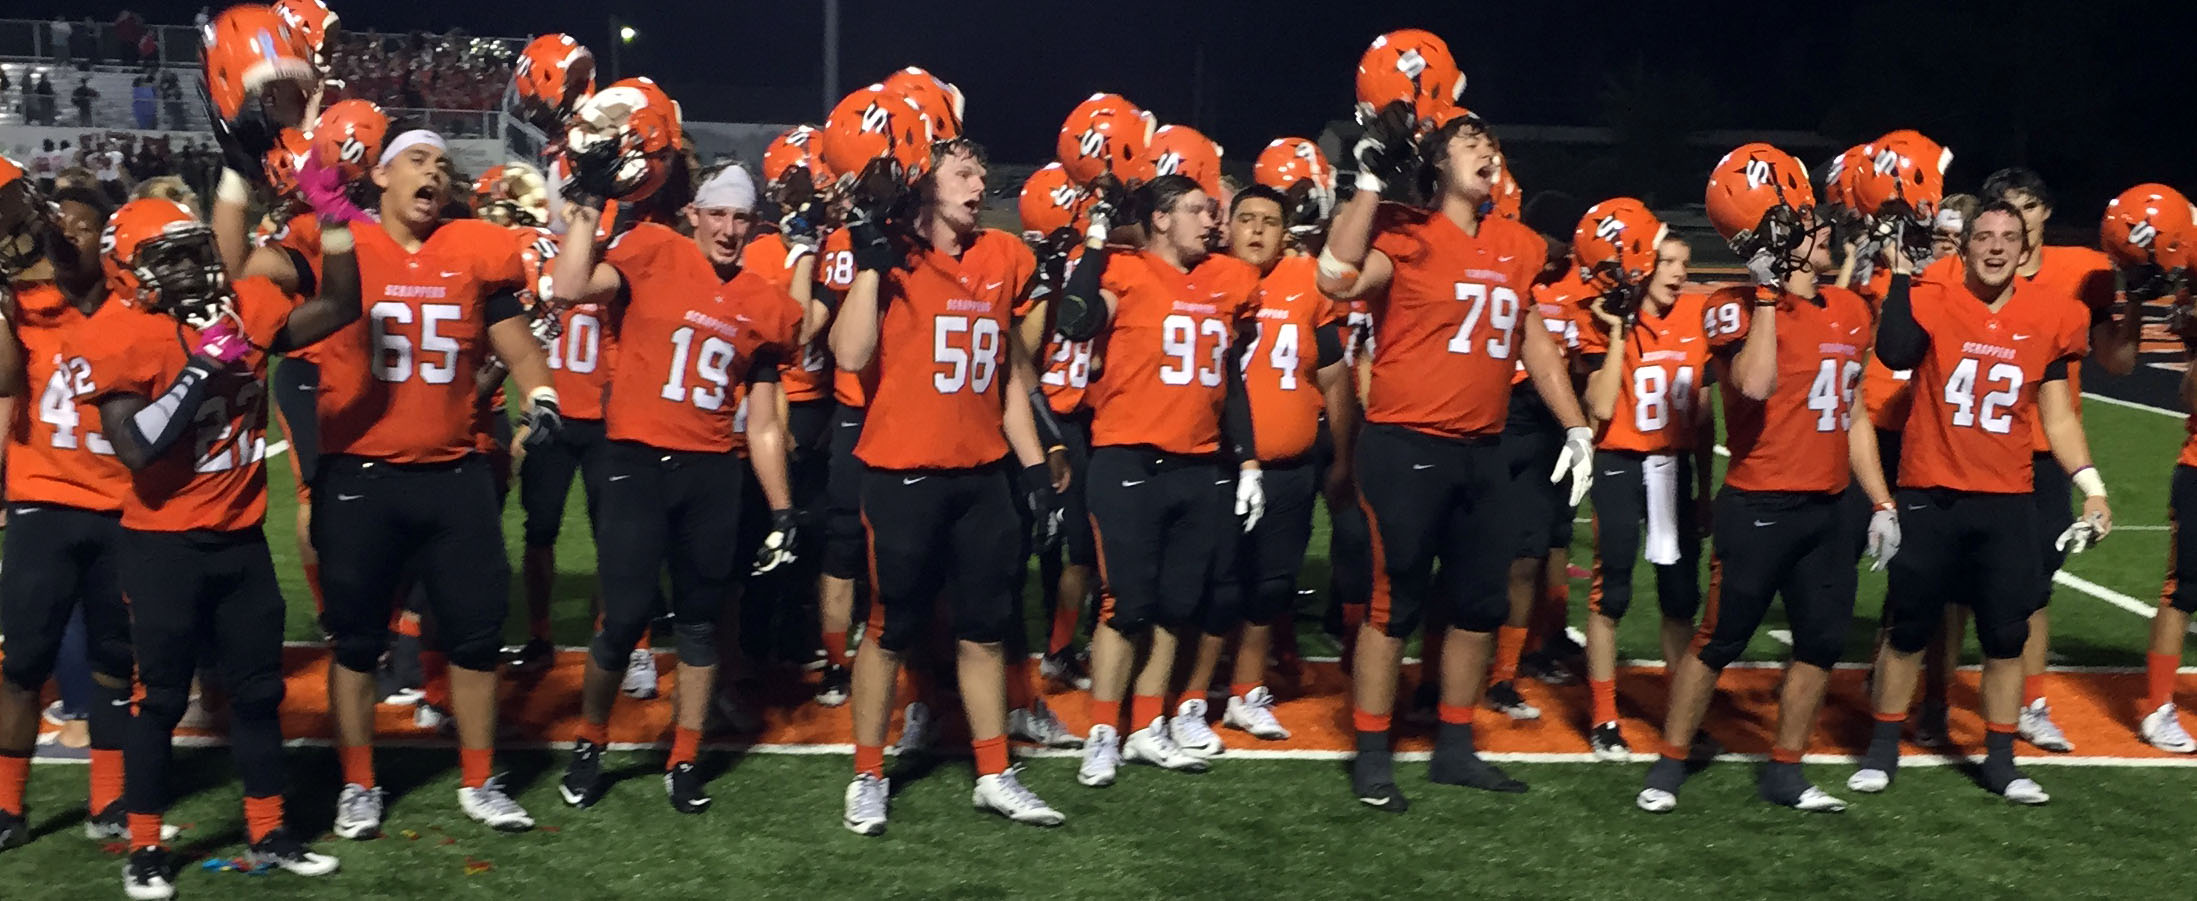 The Scrappers sing their fight song in front of the home stands after defeating Idabel 91-63 Friday night at Scrapper Stadium.